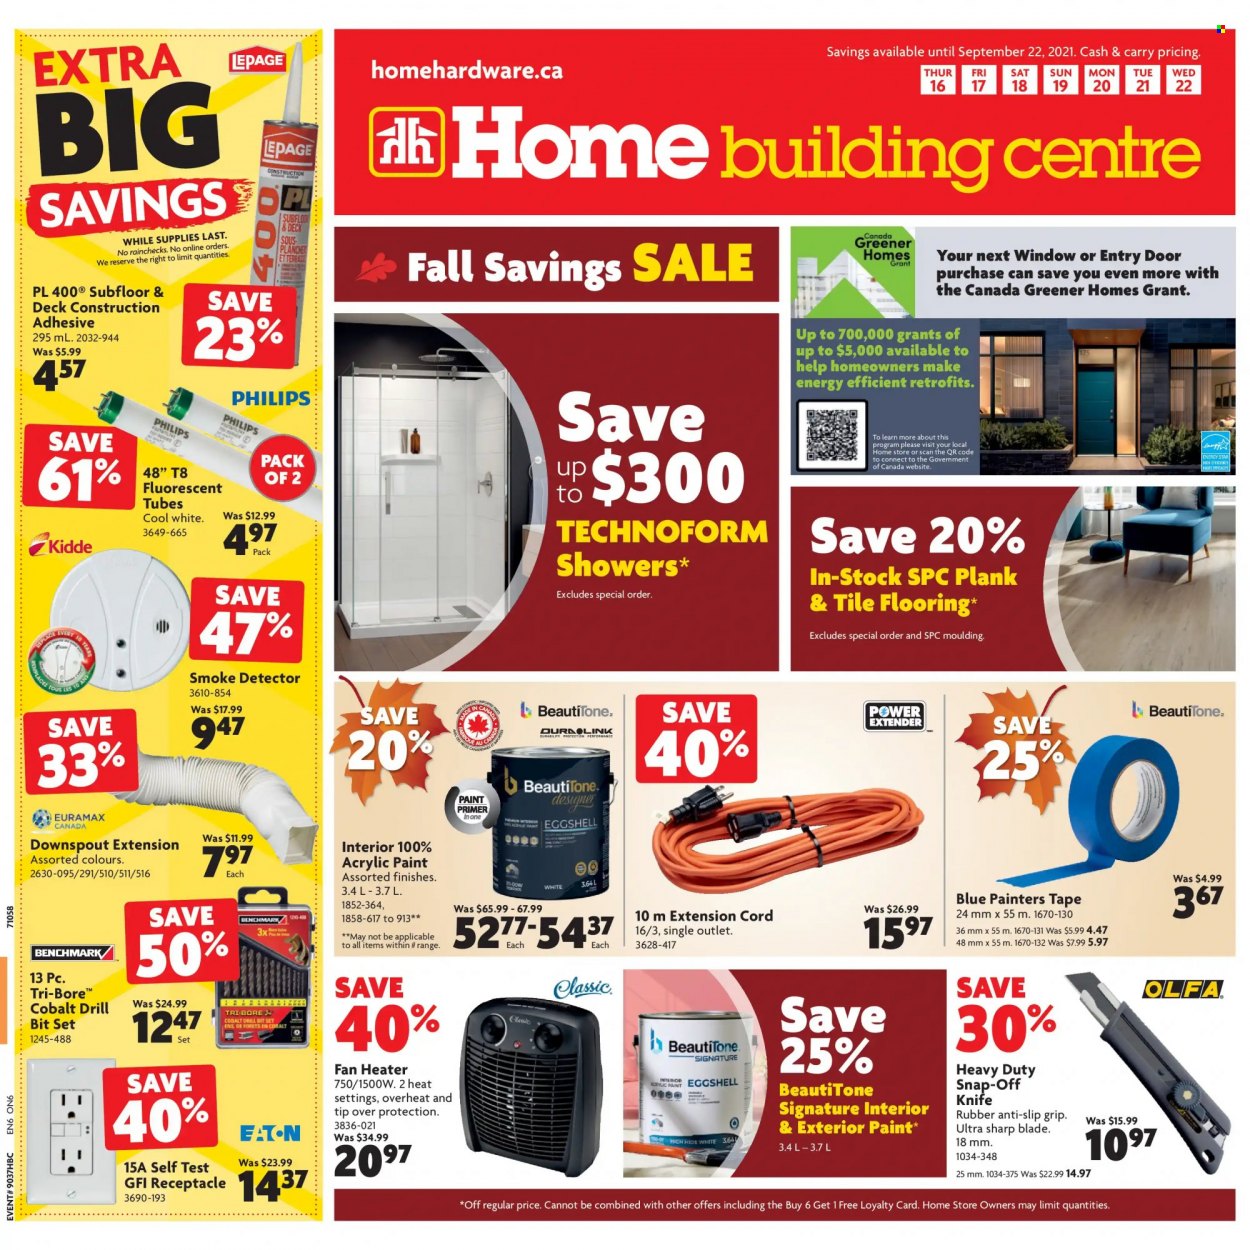 thumbnail - Home Building Centre Flyer - September 16, 2021 - September 22, 2021 - Sales products - Philips, adhesive, paint, heater, fan heater, flooring, drill bit set, extension cord. Page 1.